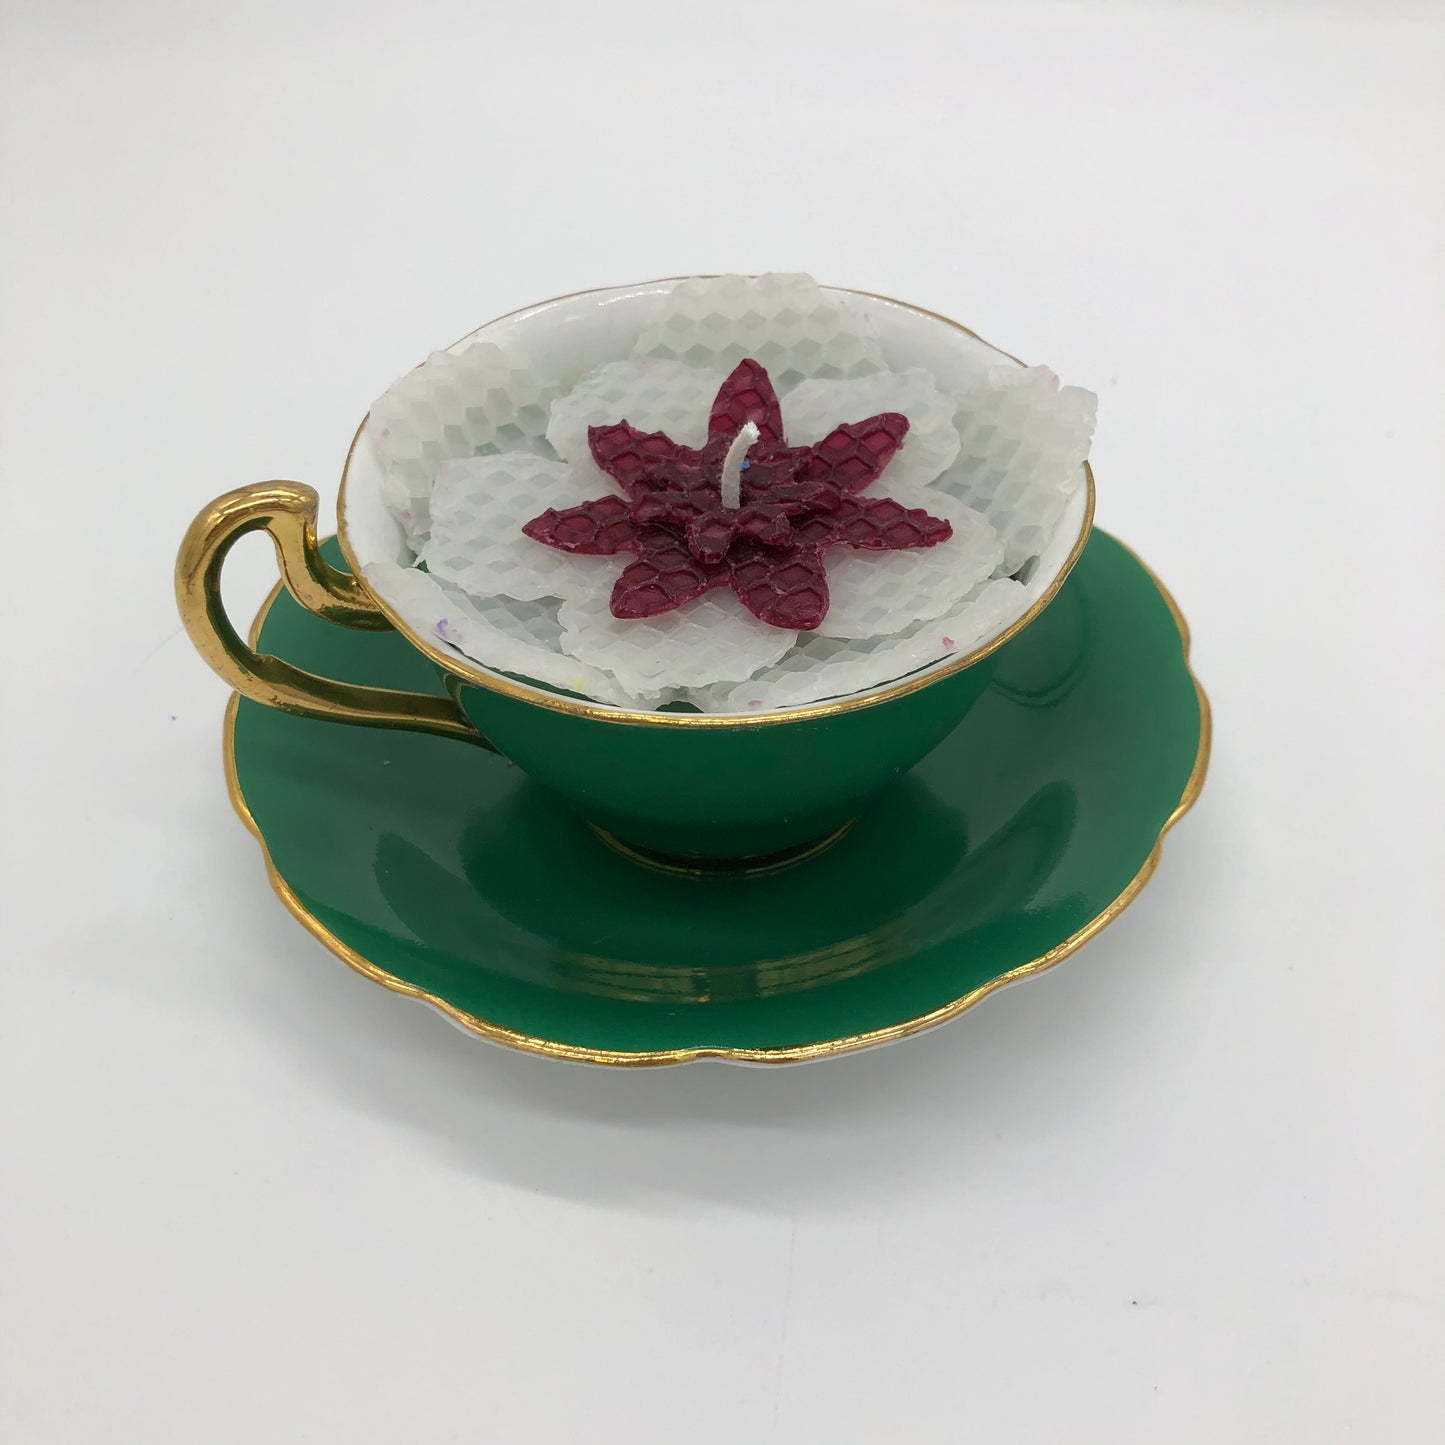 One-of-a-kind Teacup Candles (Set 3)